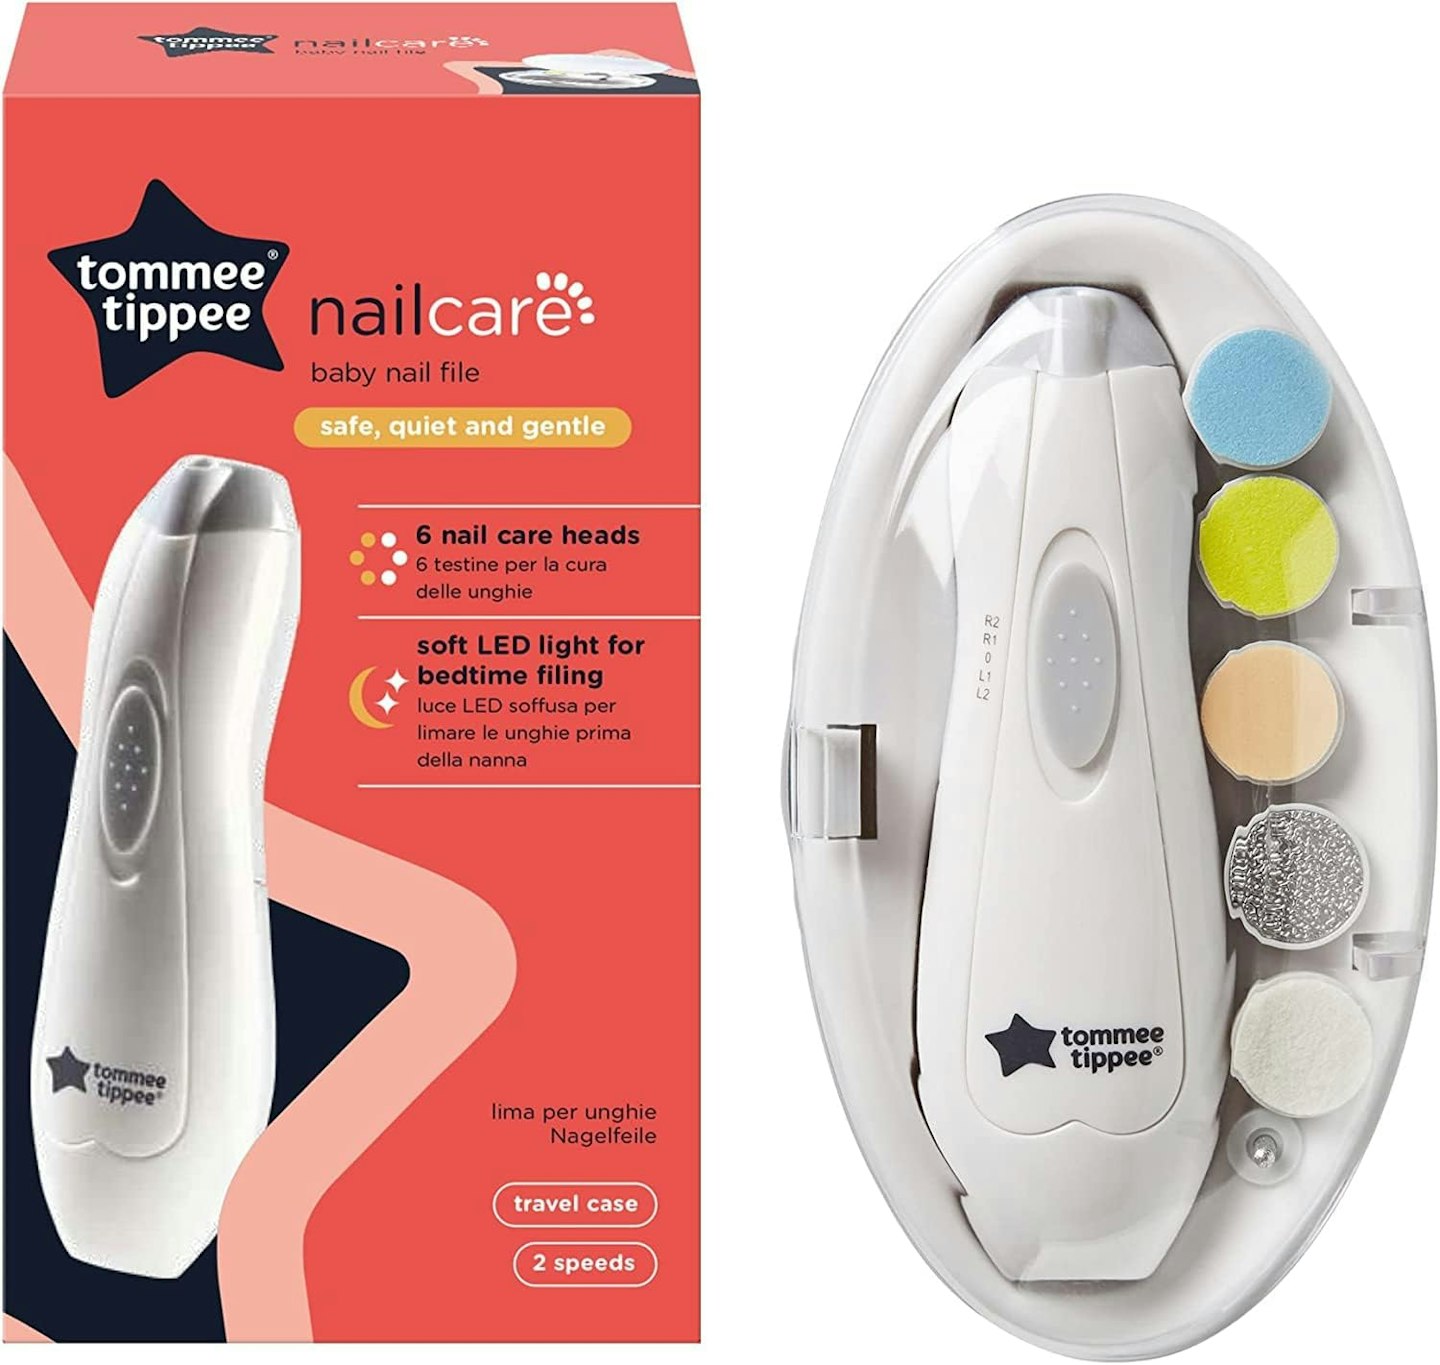 Tommee Tippee - Electric Baby Nail File Trimmer